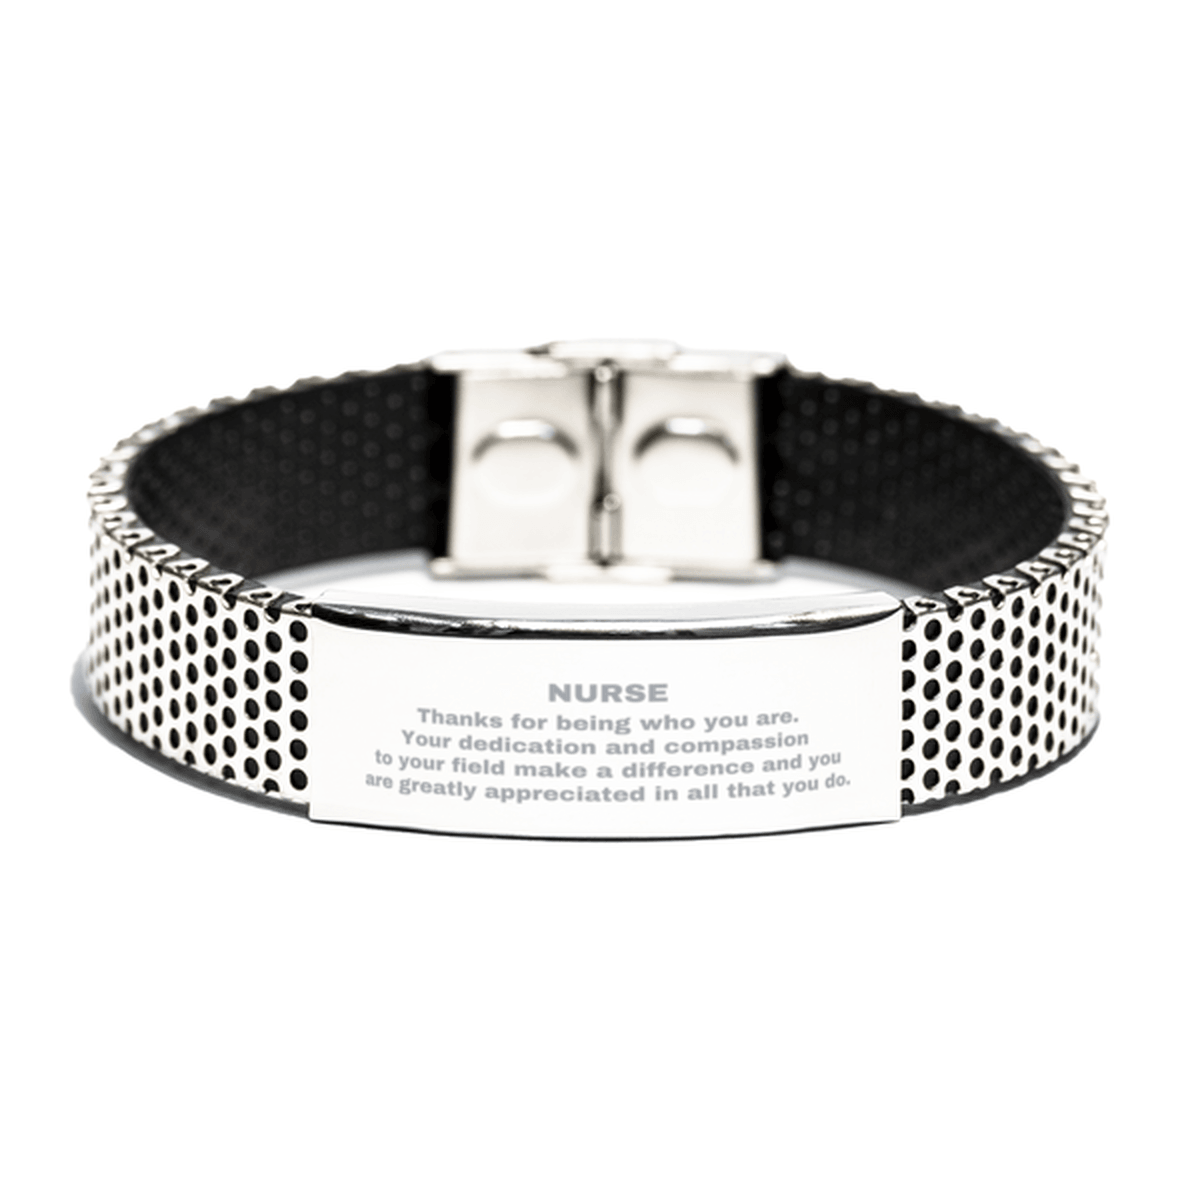 Nurse Silver Shark Mesh Stainless Steel Engraved Bracelet - Thanks for being who you are - Birthday Christmas Jewelry Gifts Coworkers Colleague Boss - Mallard Moon Gift Shop